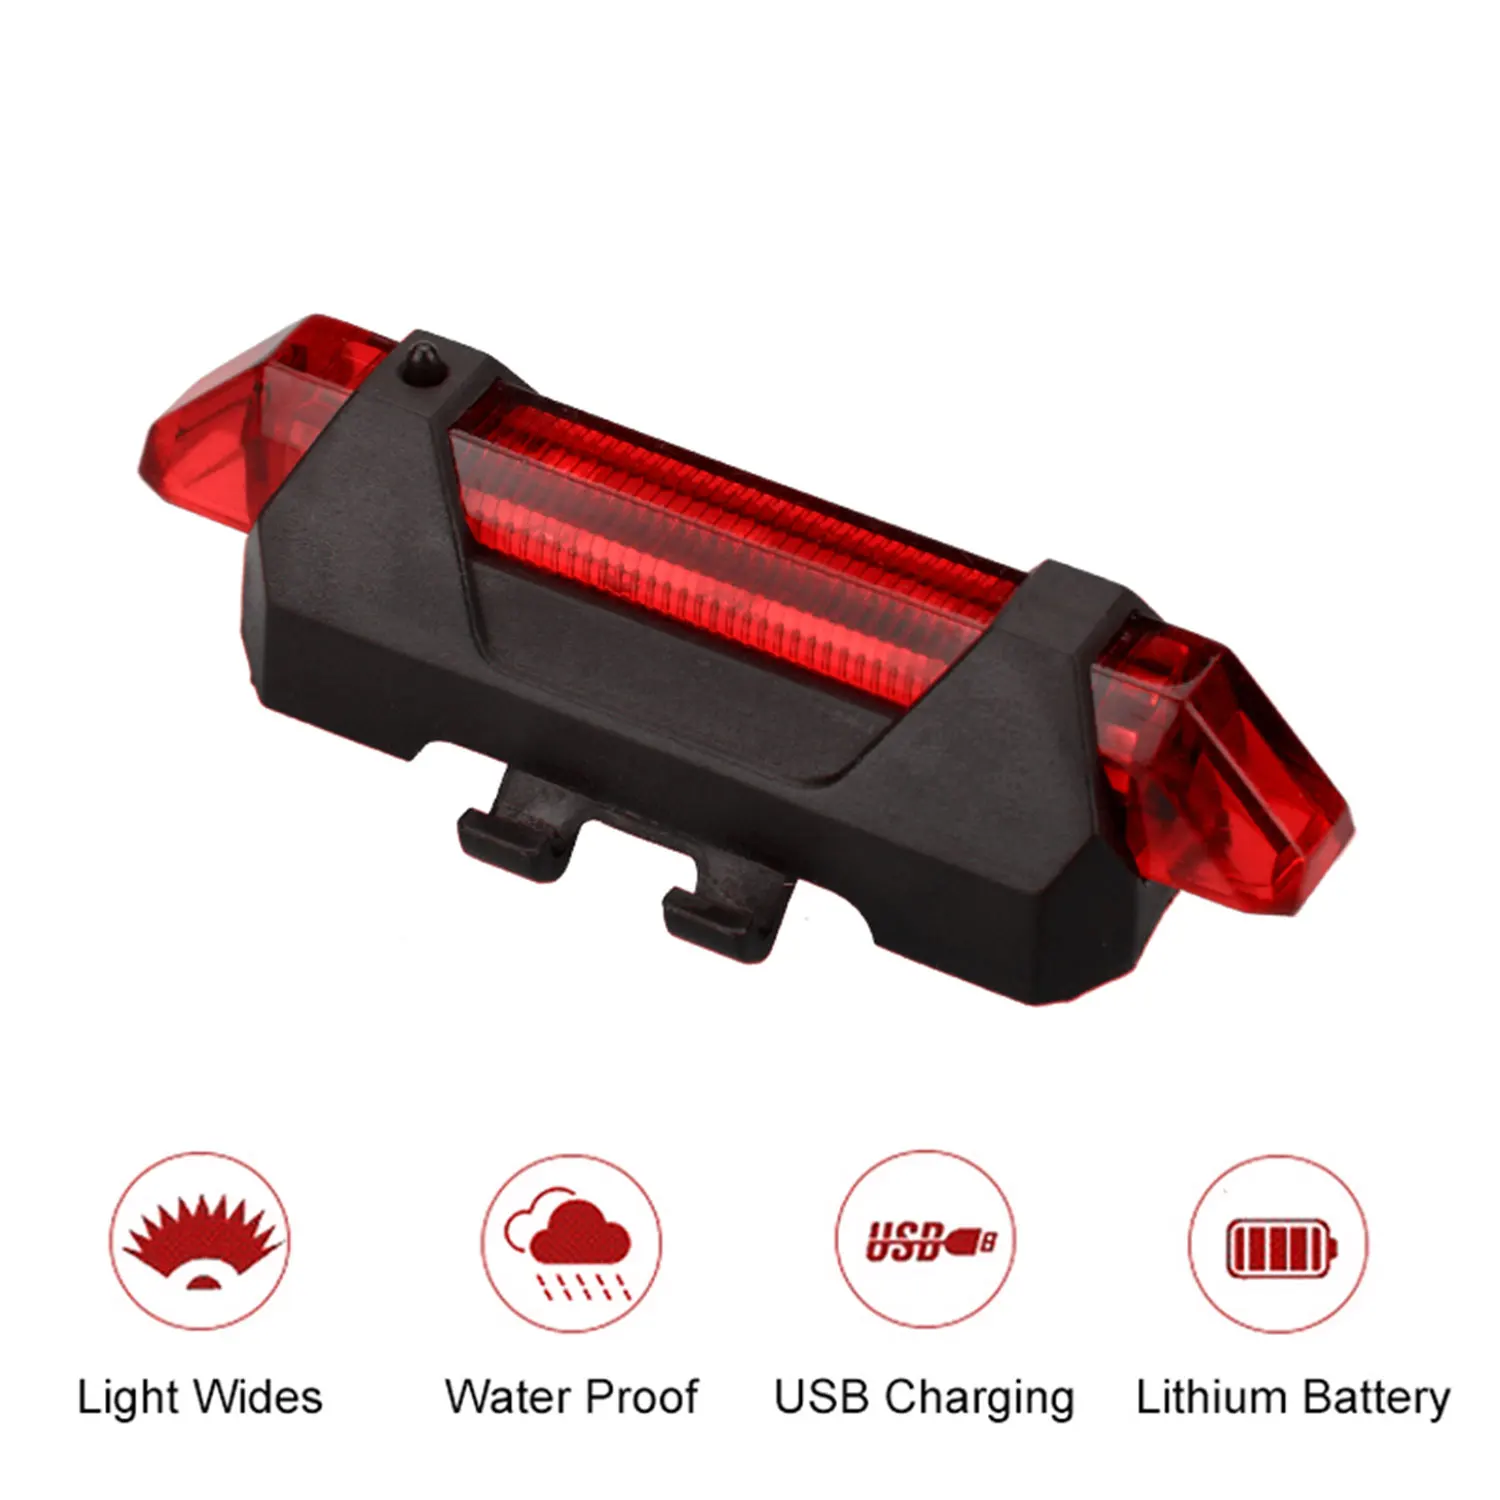 Cycling 5 LED USB Rechargeable Bike Bicycle Tail Warning Light Rear Safety Lamp 